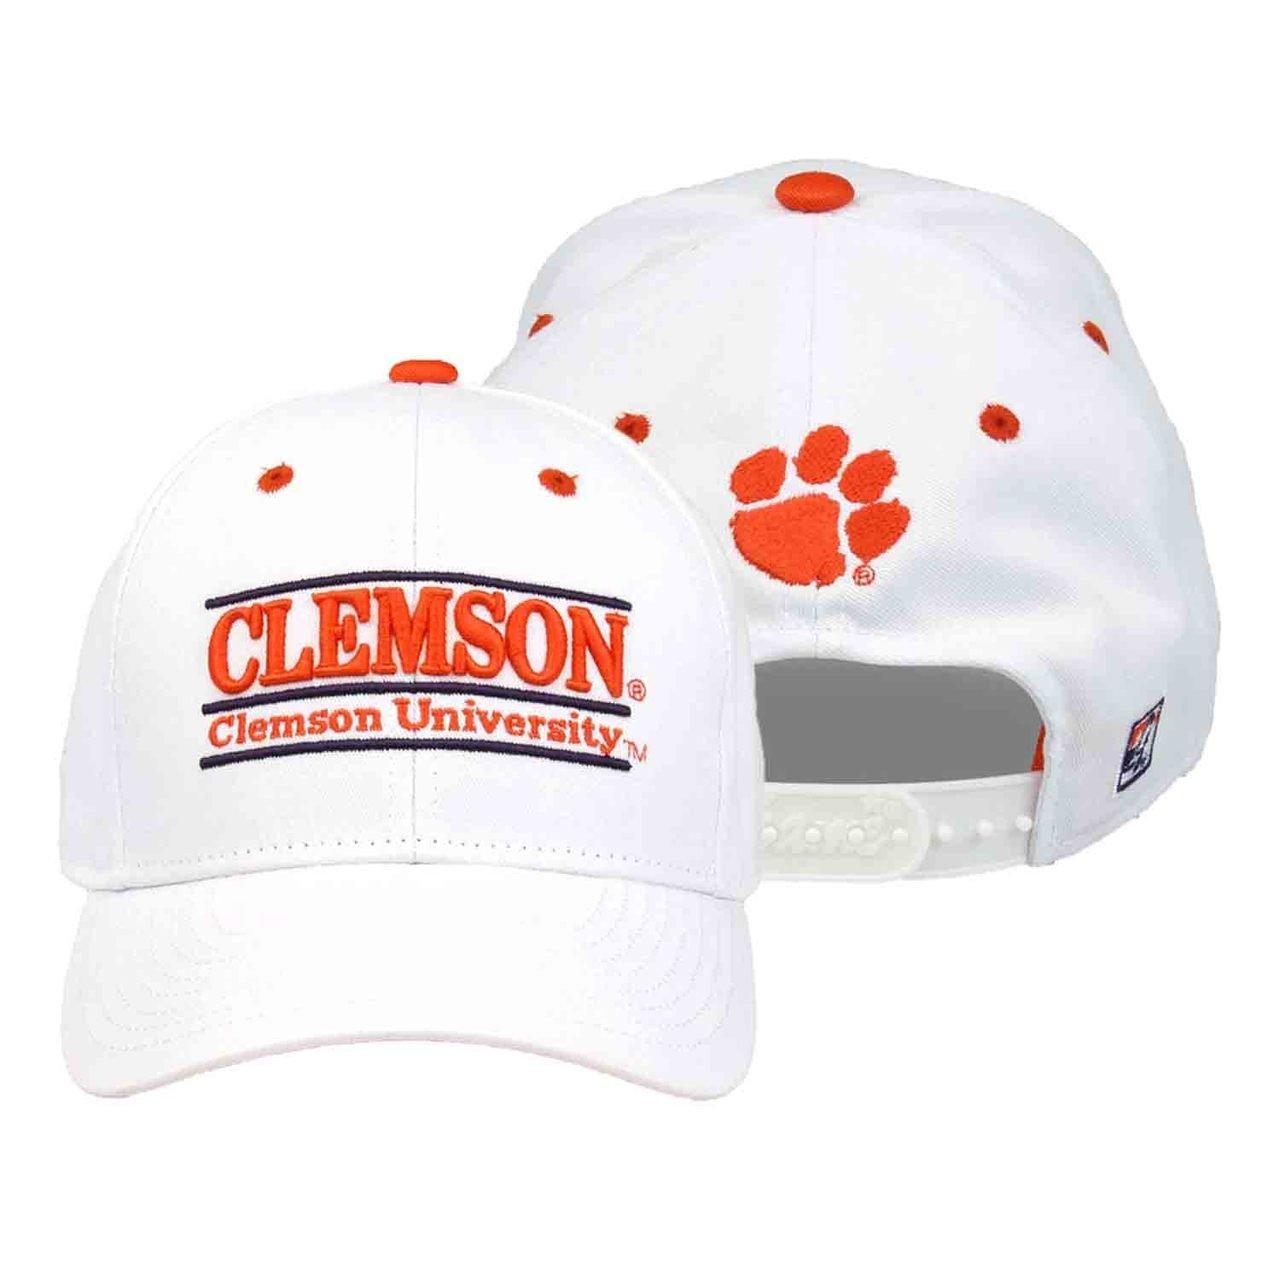 Clemson University Fitted Hat, Clemson Tigers Fitted Caps